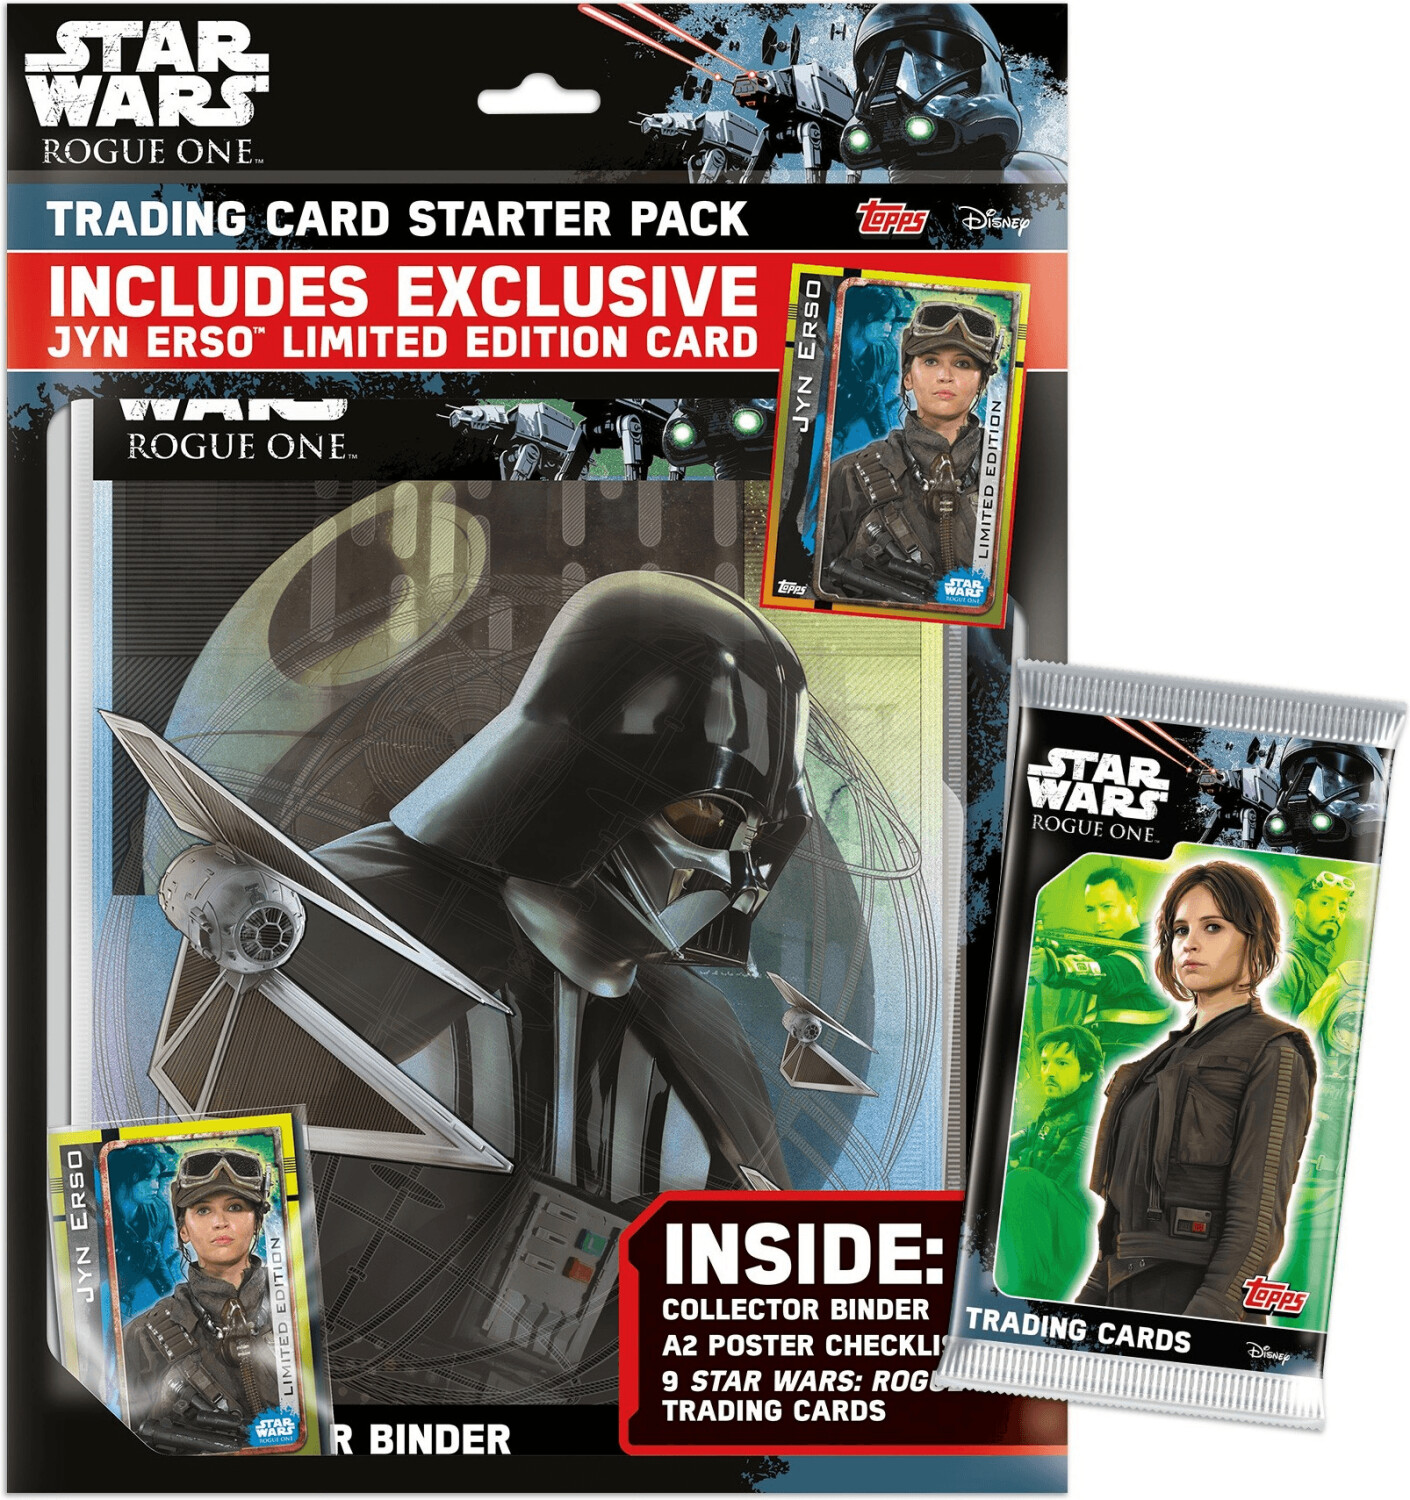 Topps Star Wars Rogue One TC Starter Pack